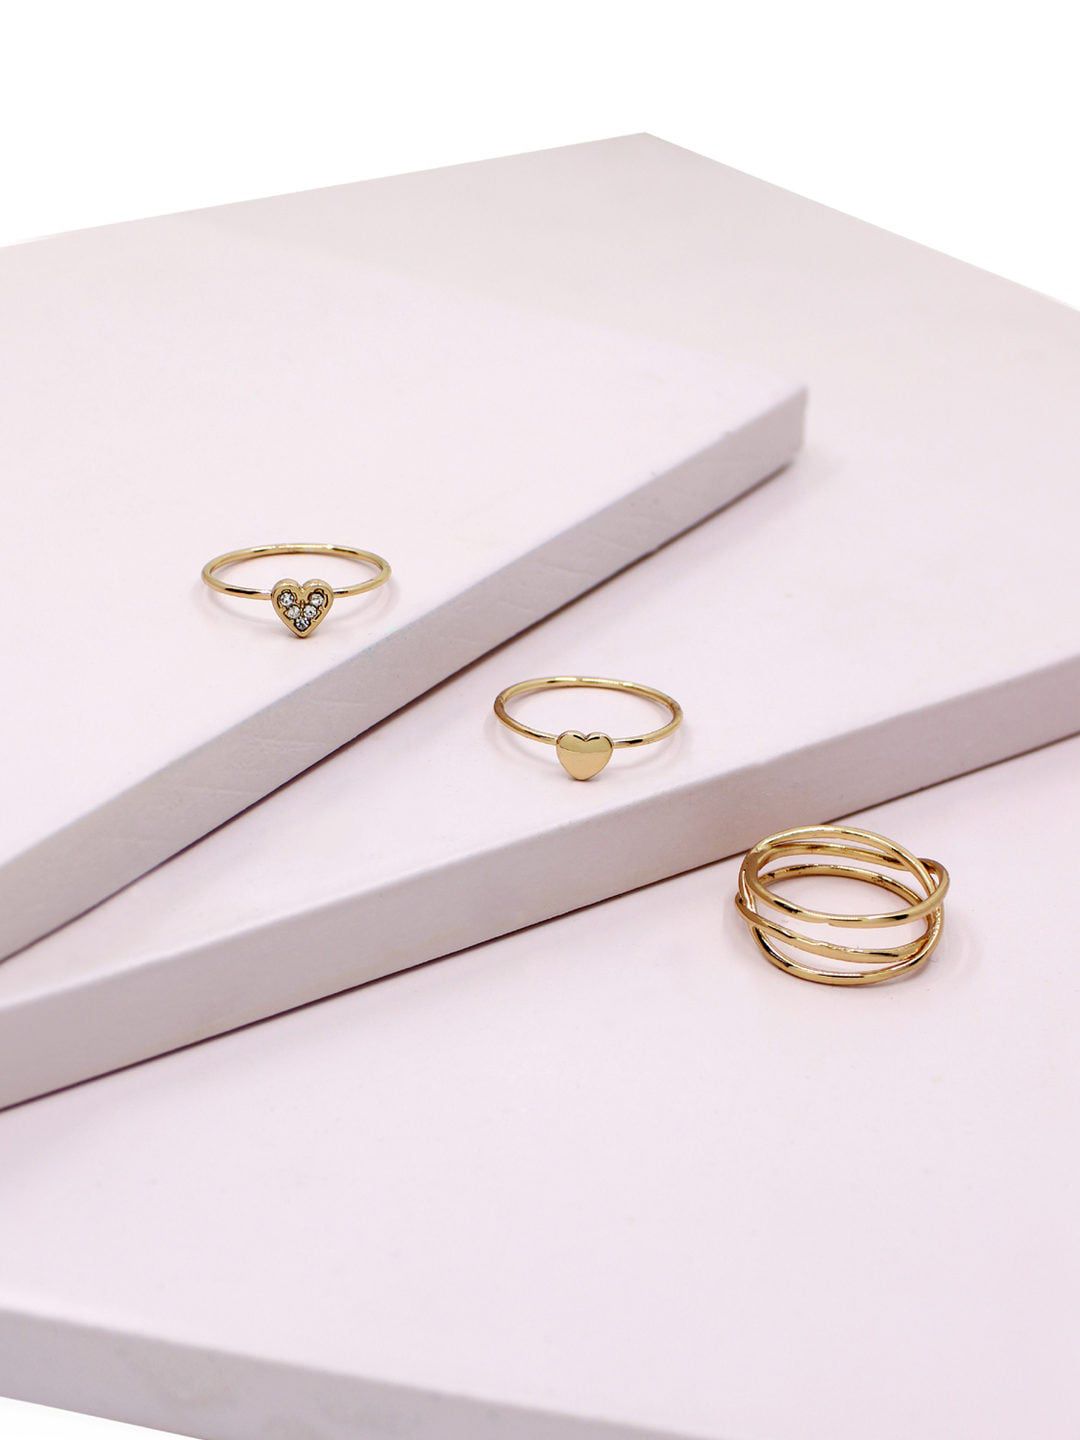 Runway Ritual Set Of 3 Gold-Toned Delicate Finger Rings Price in India